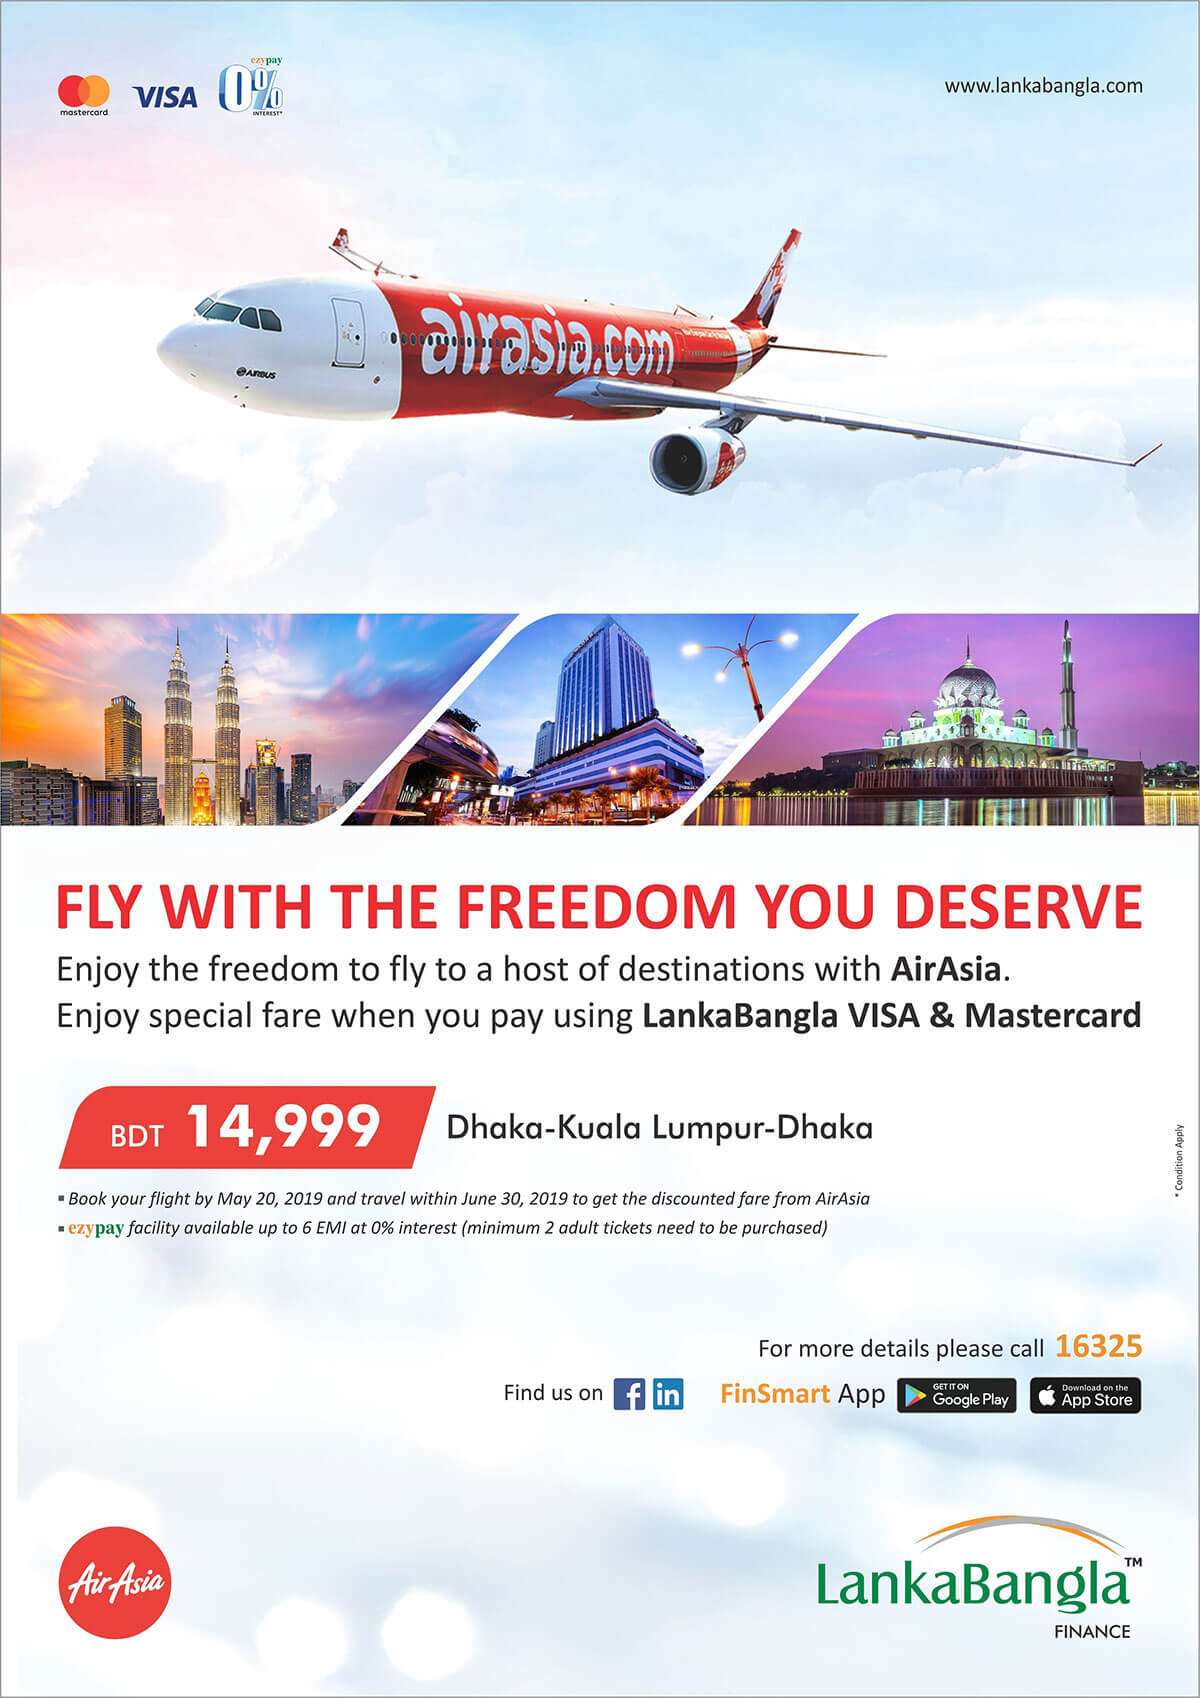 Enjoy the freedom to fly to a host of destinations with AirAsia